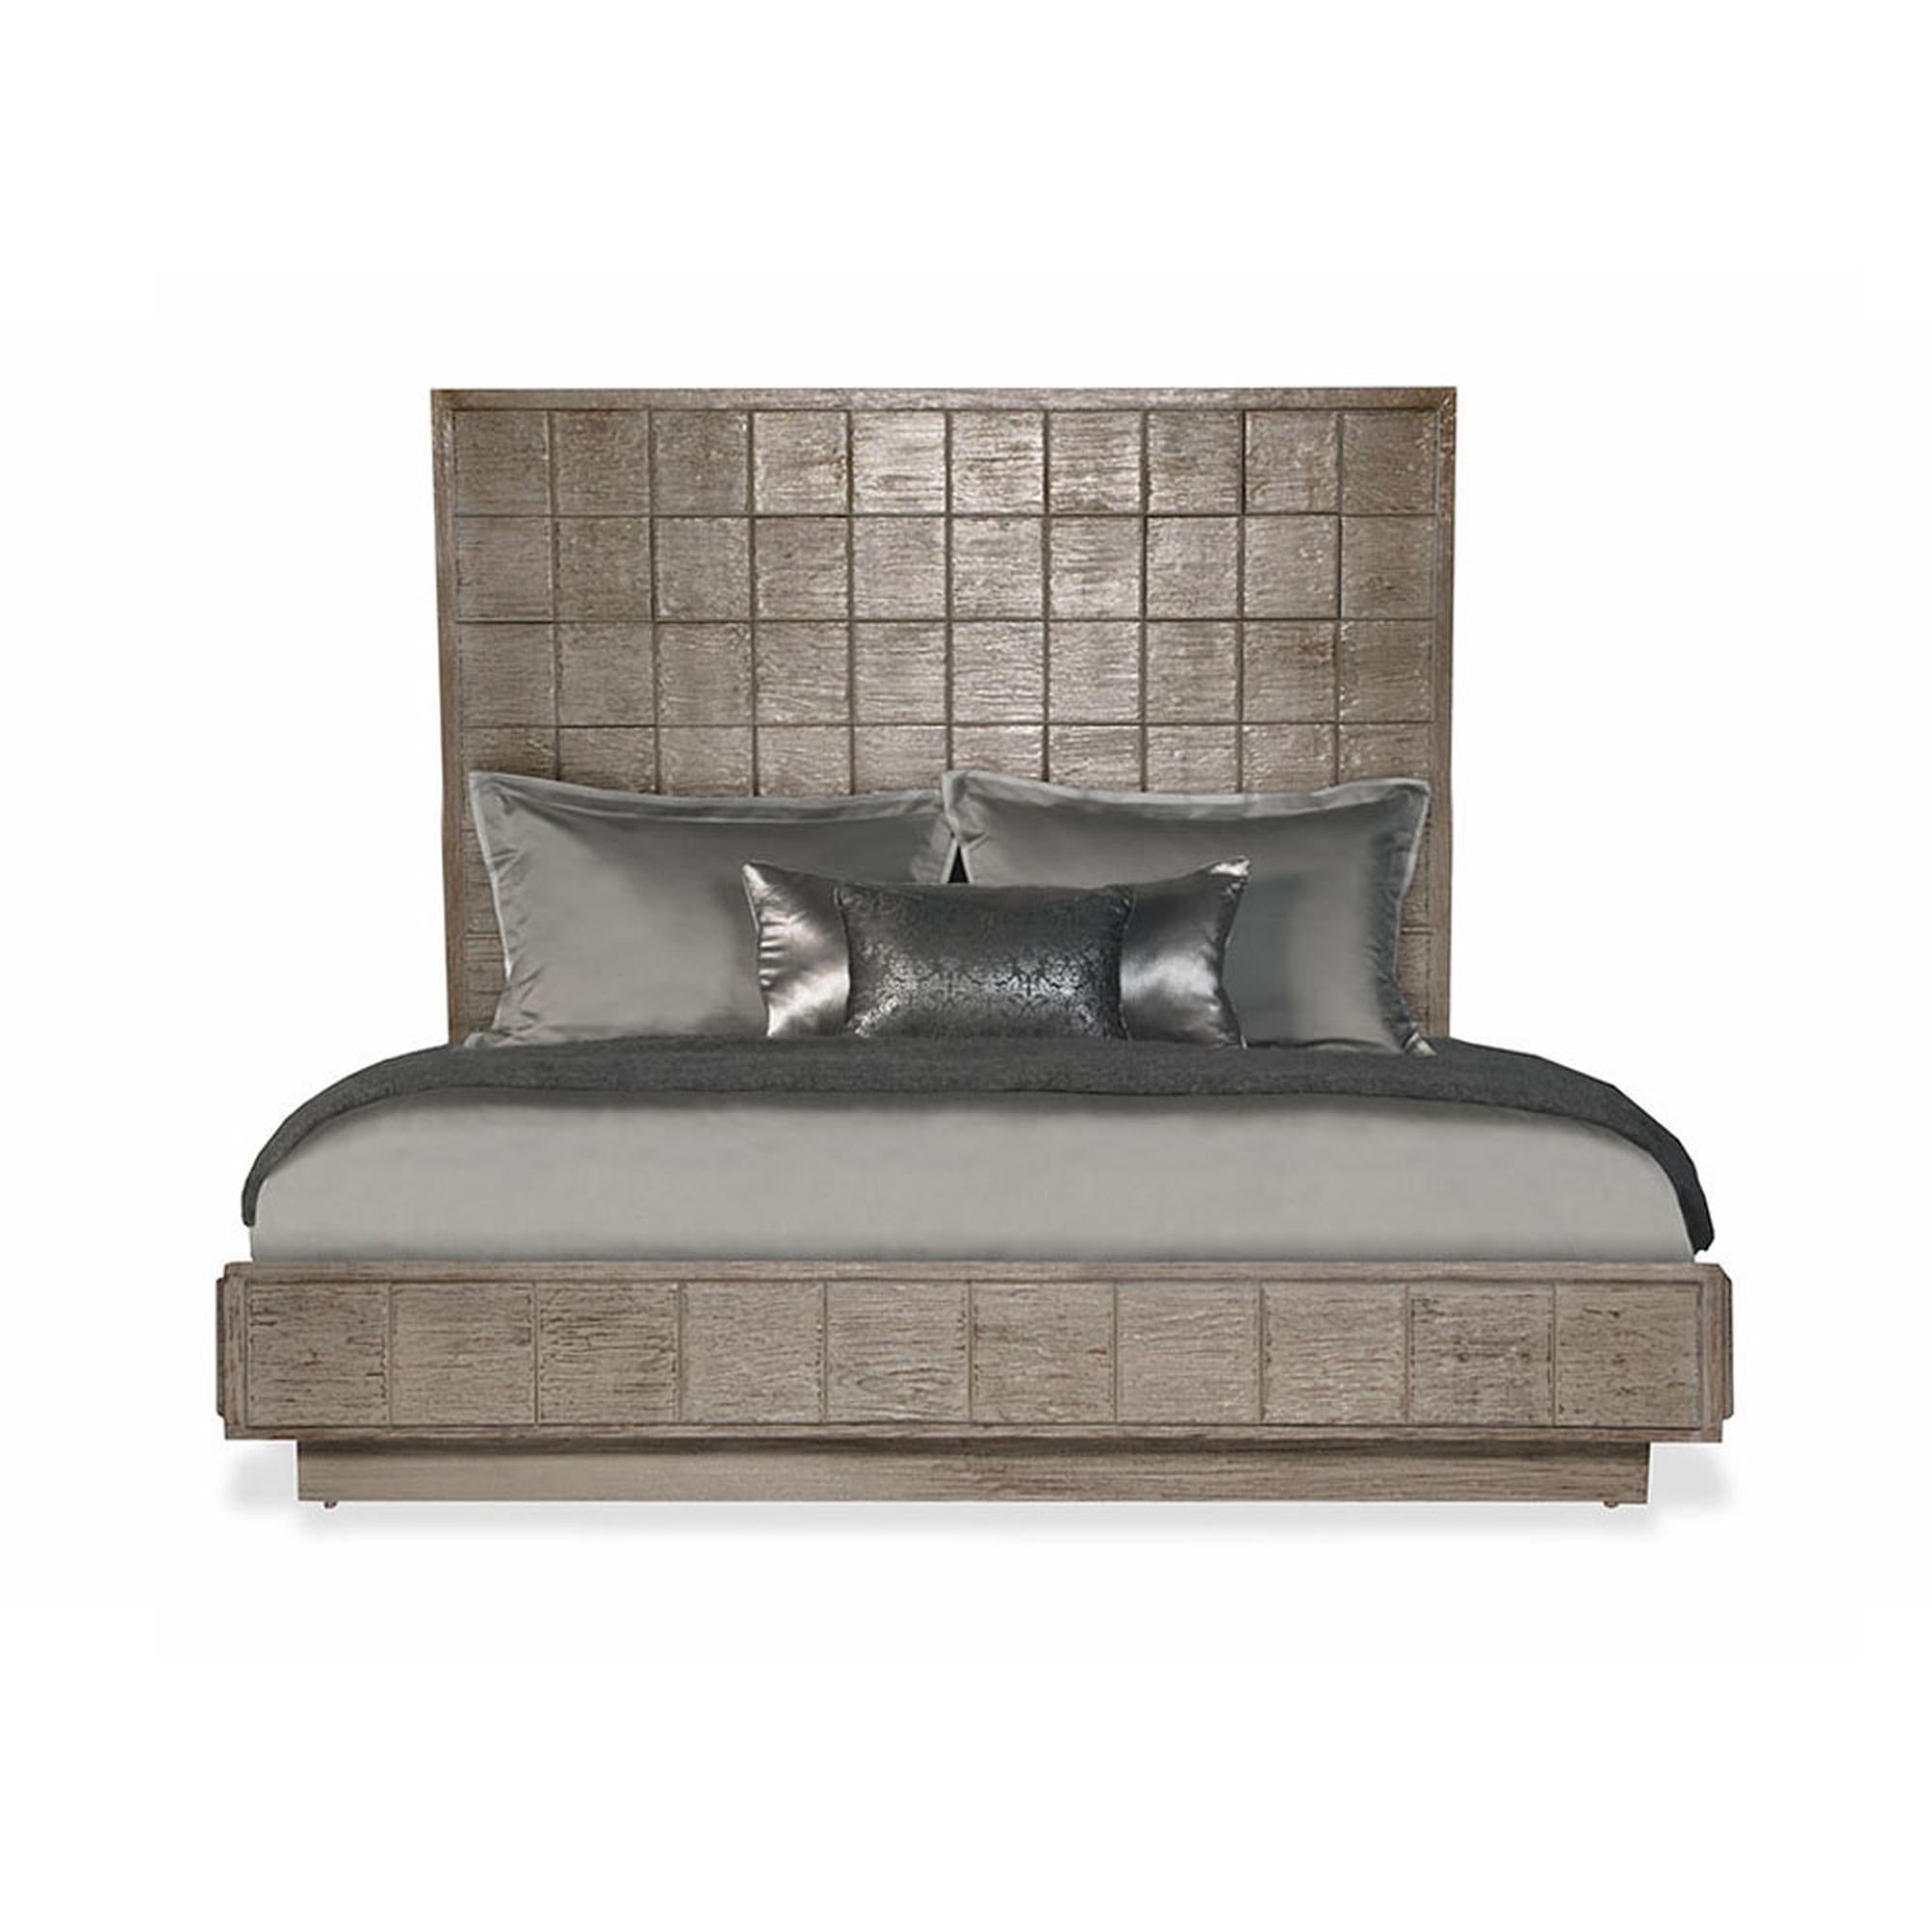 Dramatic and extremely refined, the Mulholland bed is a classic piece, with a modern, rustic, appeal. The wooden headboard and platform are constructed of individually hand-finished and placed square wooden panels. The Mulholland collection bed is a